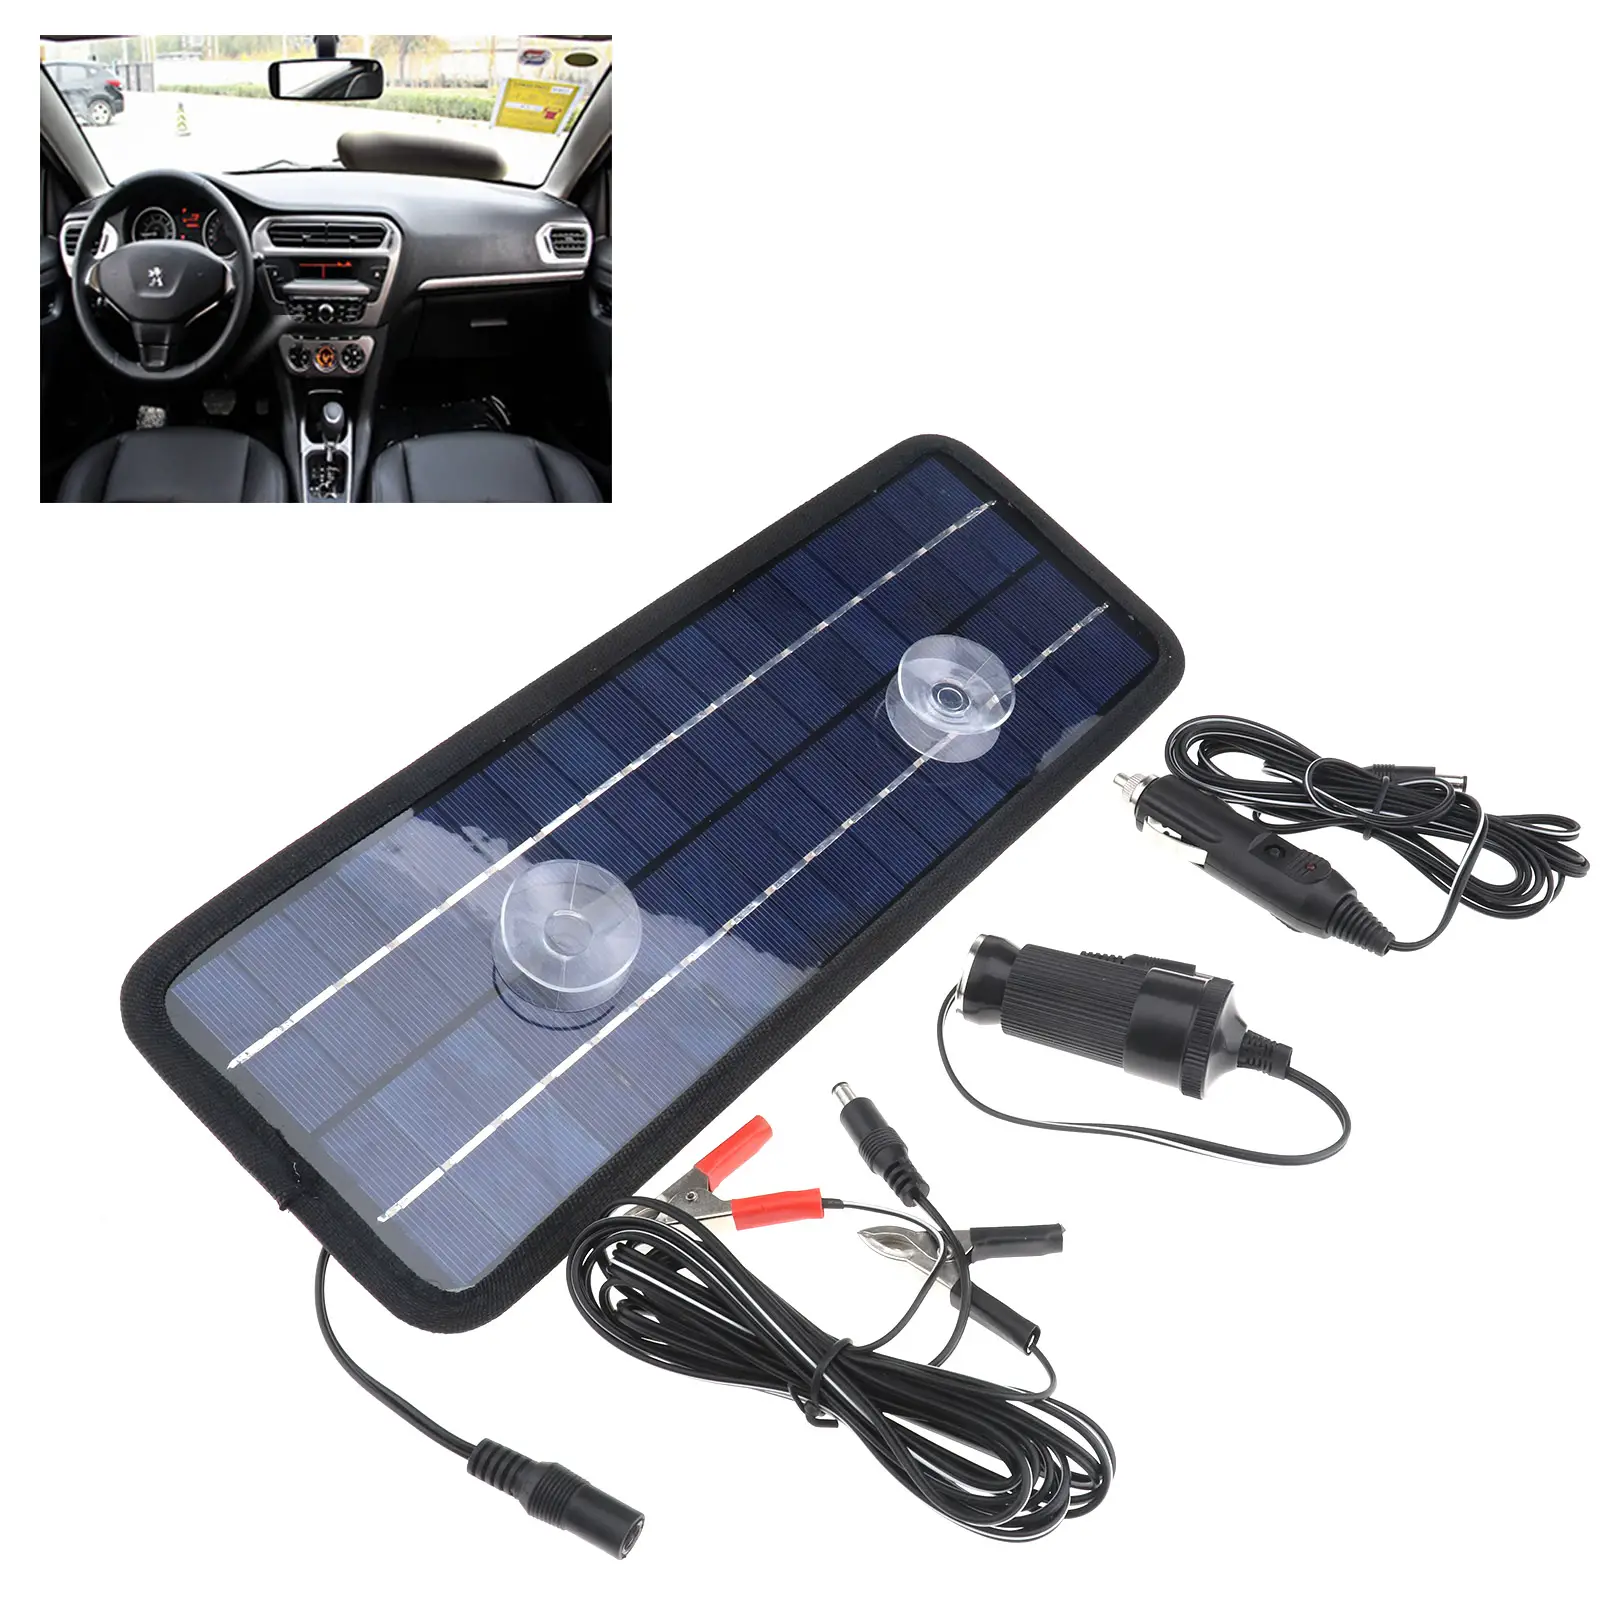 New Solar Trickle Panel 12V 4.5W Power Portable Battery Charger Car ...